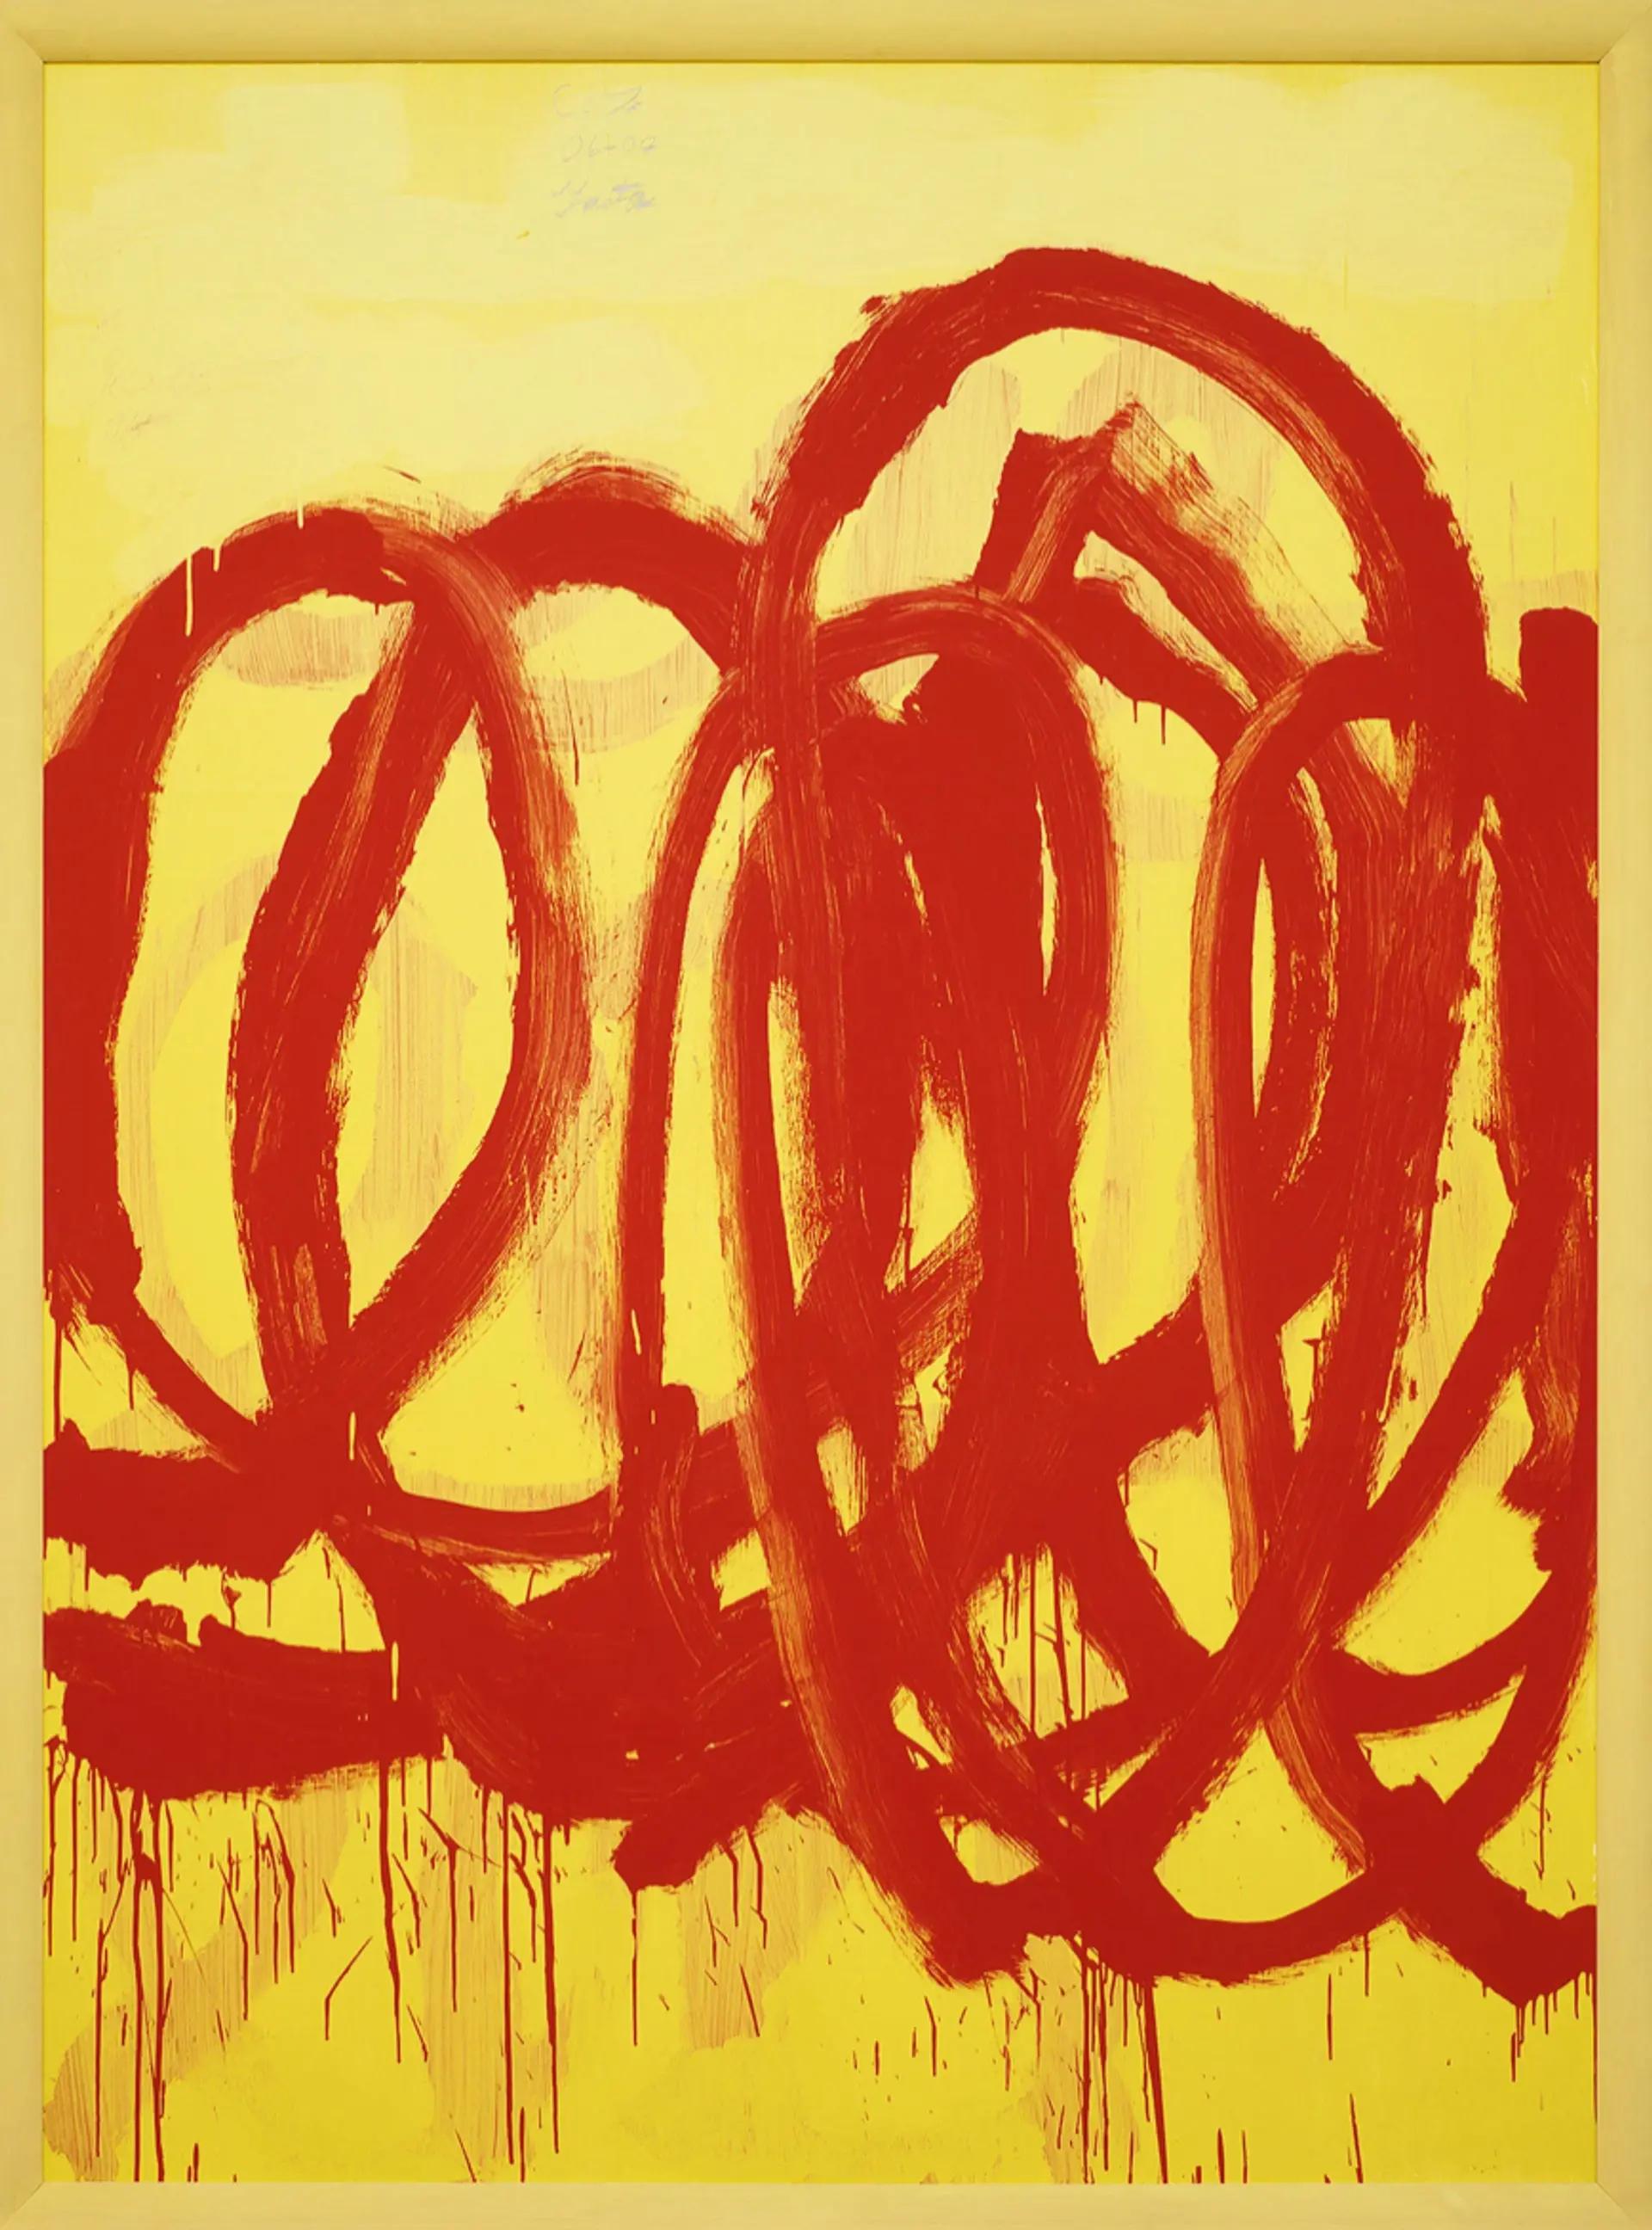 Cy Twombly, Untitled (2007), peinture de la collection de Bill Bell. © Cy Twombly Foundation, Courtesy Gagosian